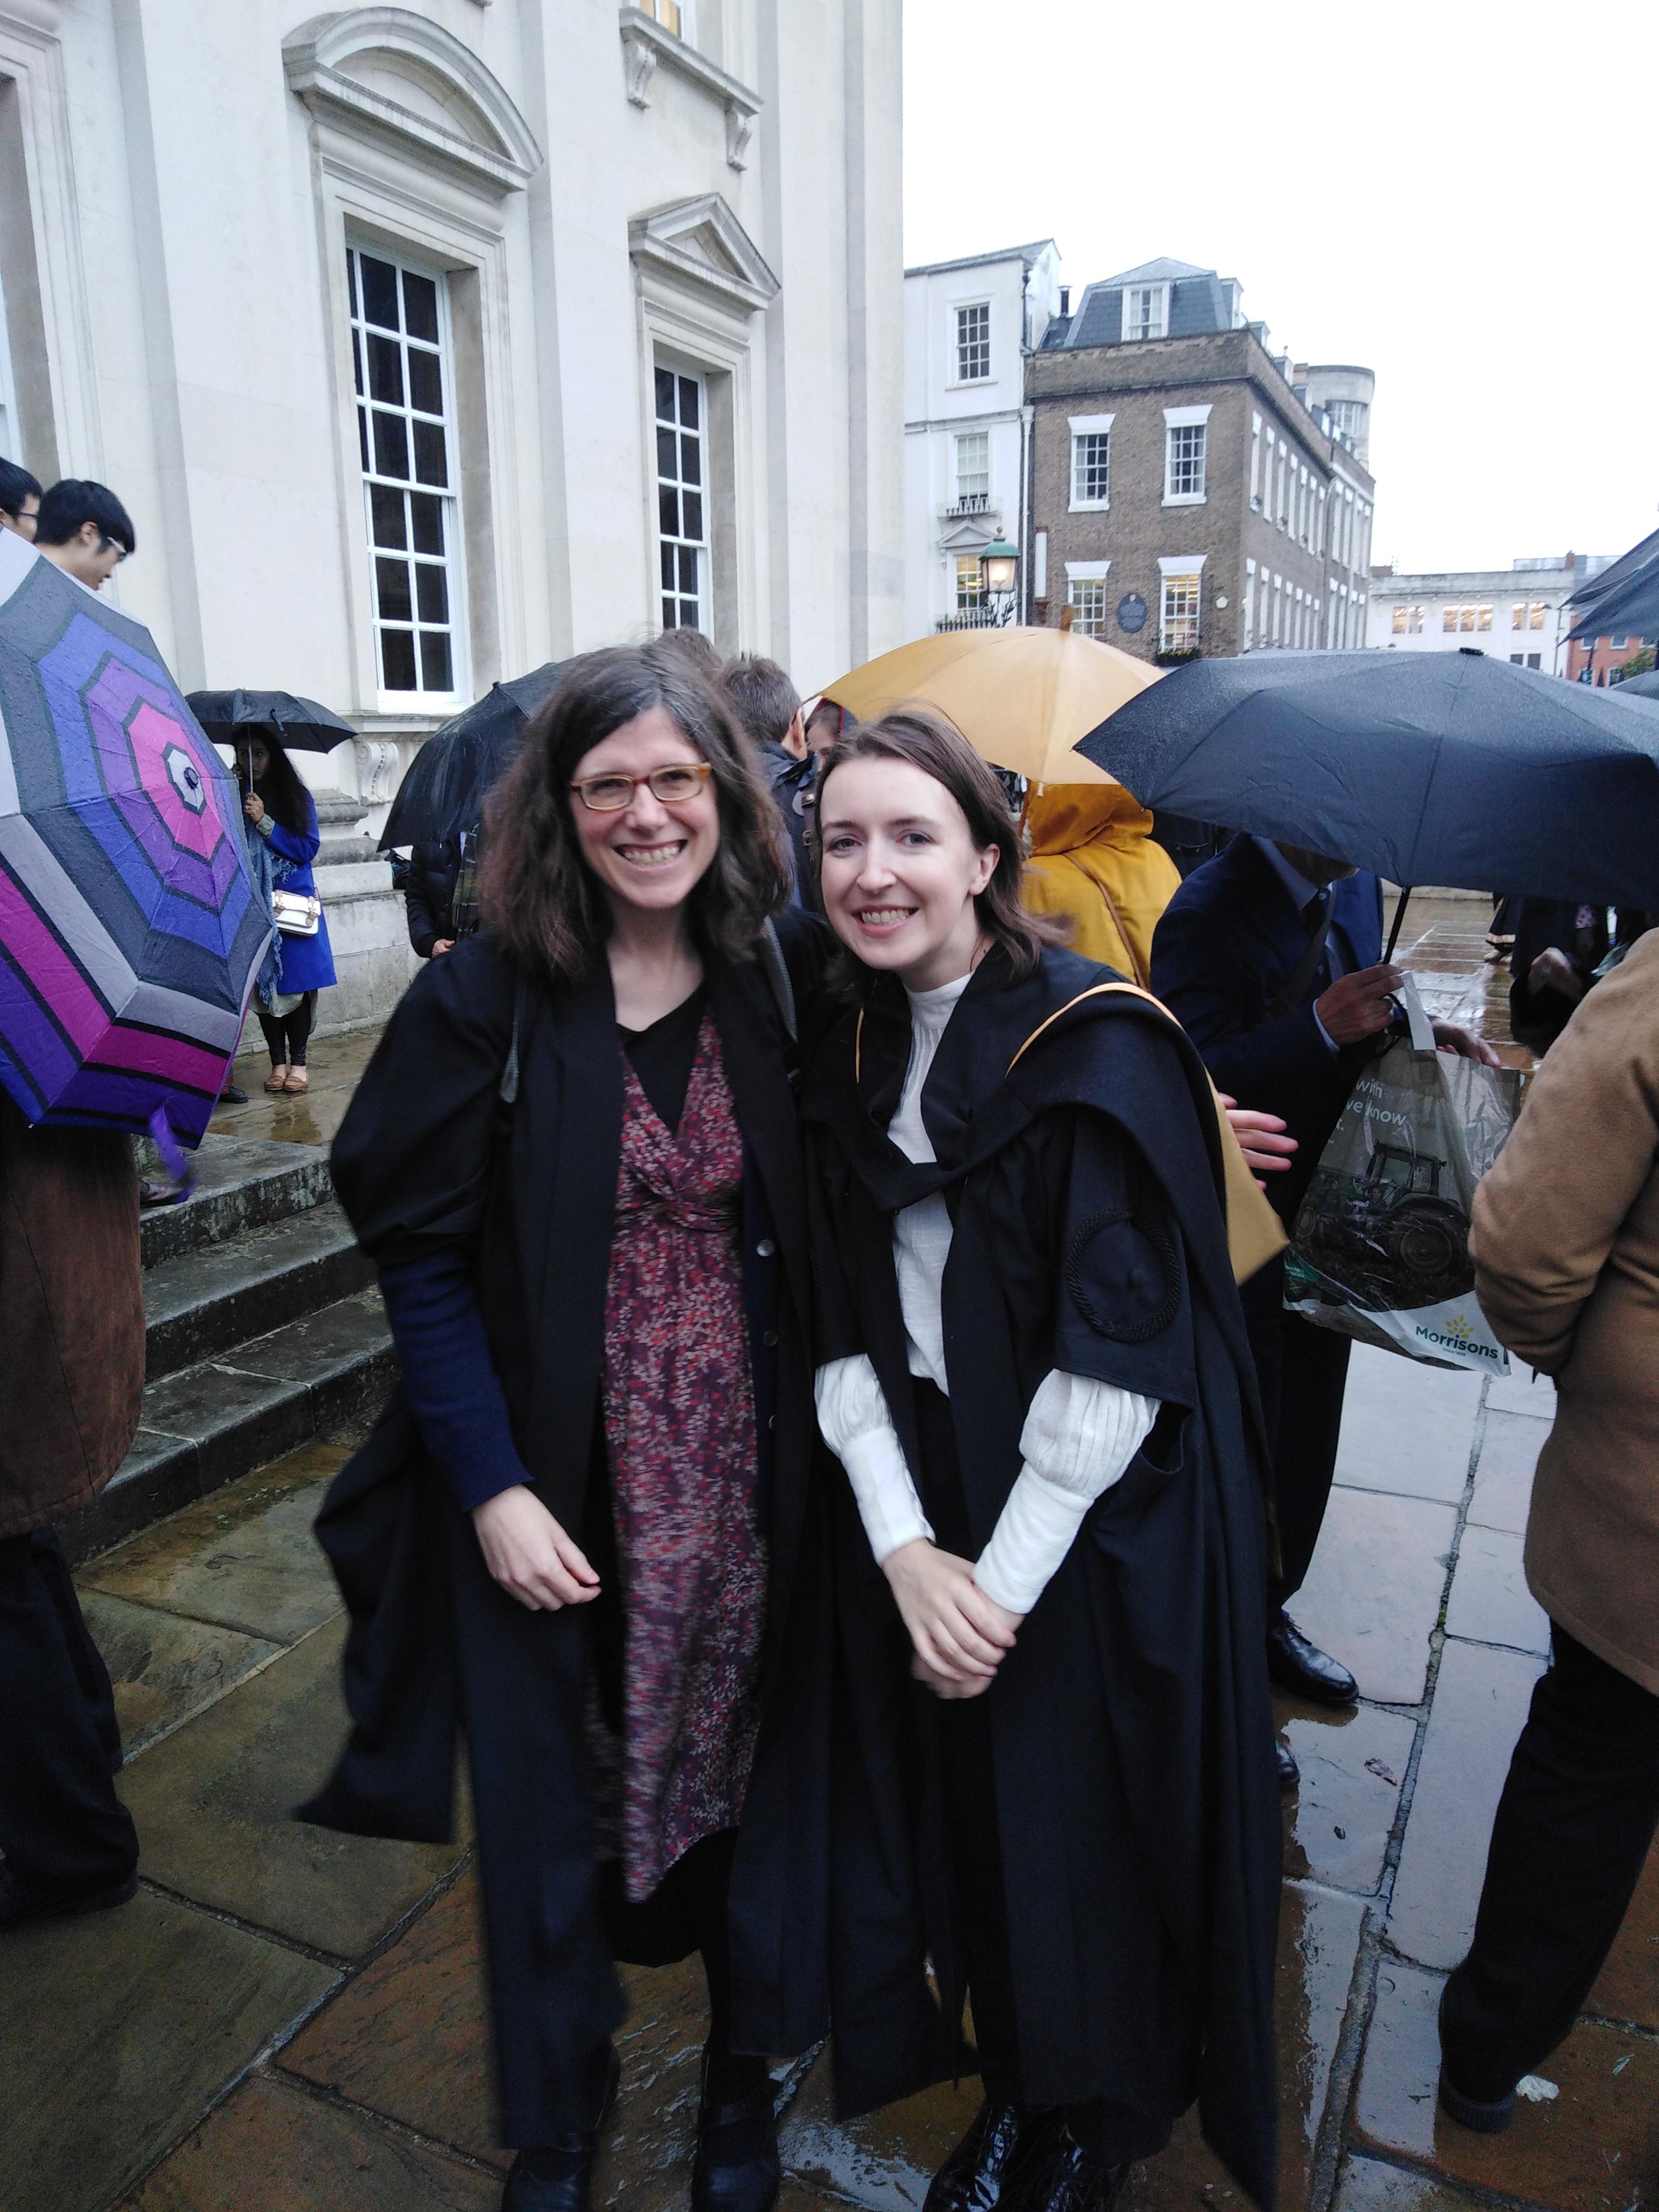 Many congratulations to Dr. Maire Ni Leathlobhair